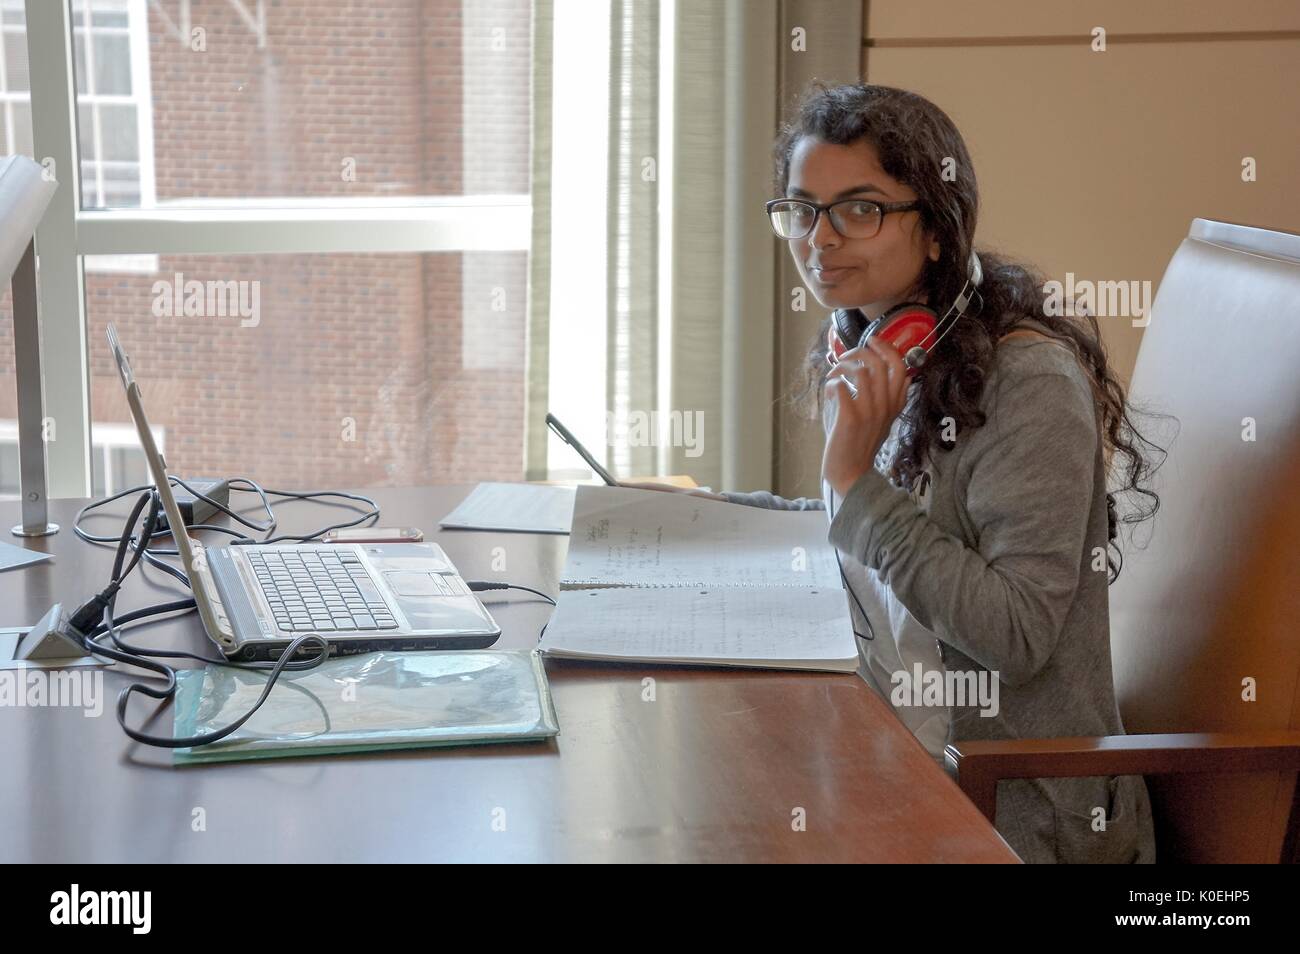 A female Johns Hopkins University student studies in the Brody Reading Room at the Brody Learning Commons with her laptop and notebooks in front of her with red headphones around her neck at Johns Hopkins University, Baltimore, Maryland, 2013. Courtesy Eric Chen. Stock Photo